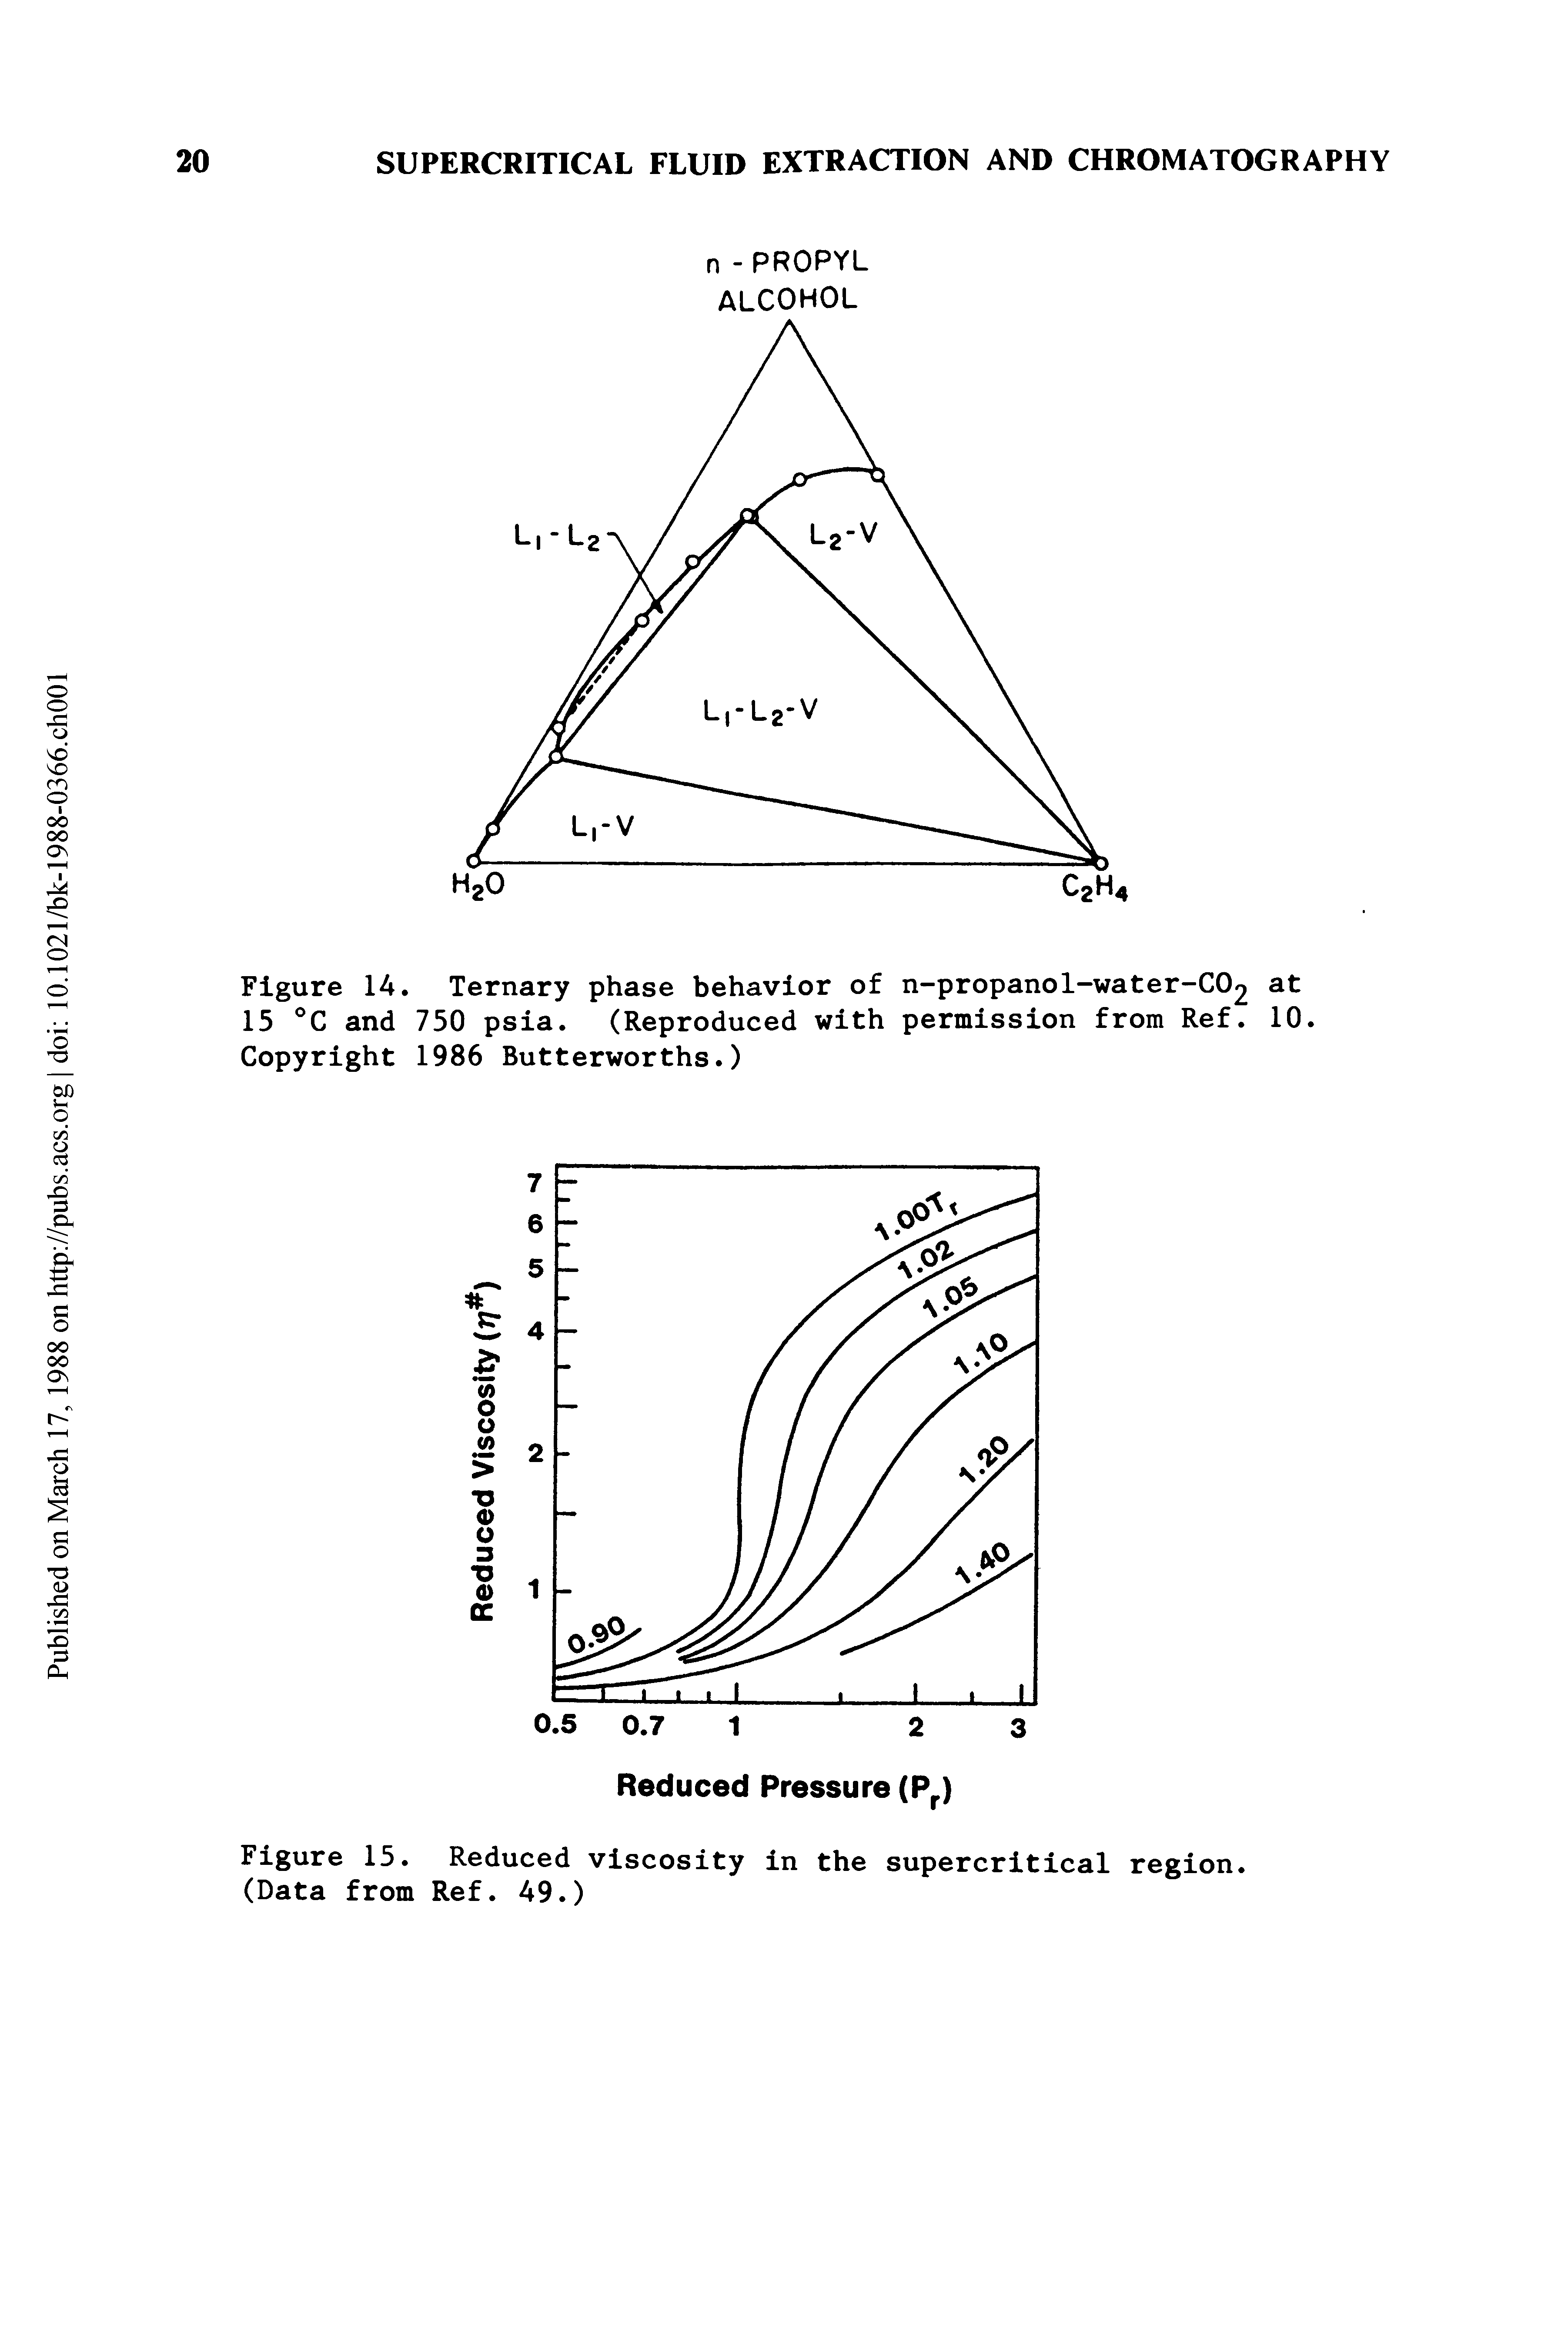 Figure 14. Ternary phase behavior of n-propanol-water-C02 at 15 °C and 750 psia. (Reproduced with permission from Ref. 10. Copyright 1986 Butterworths.)...